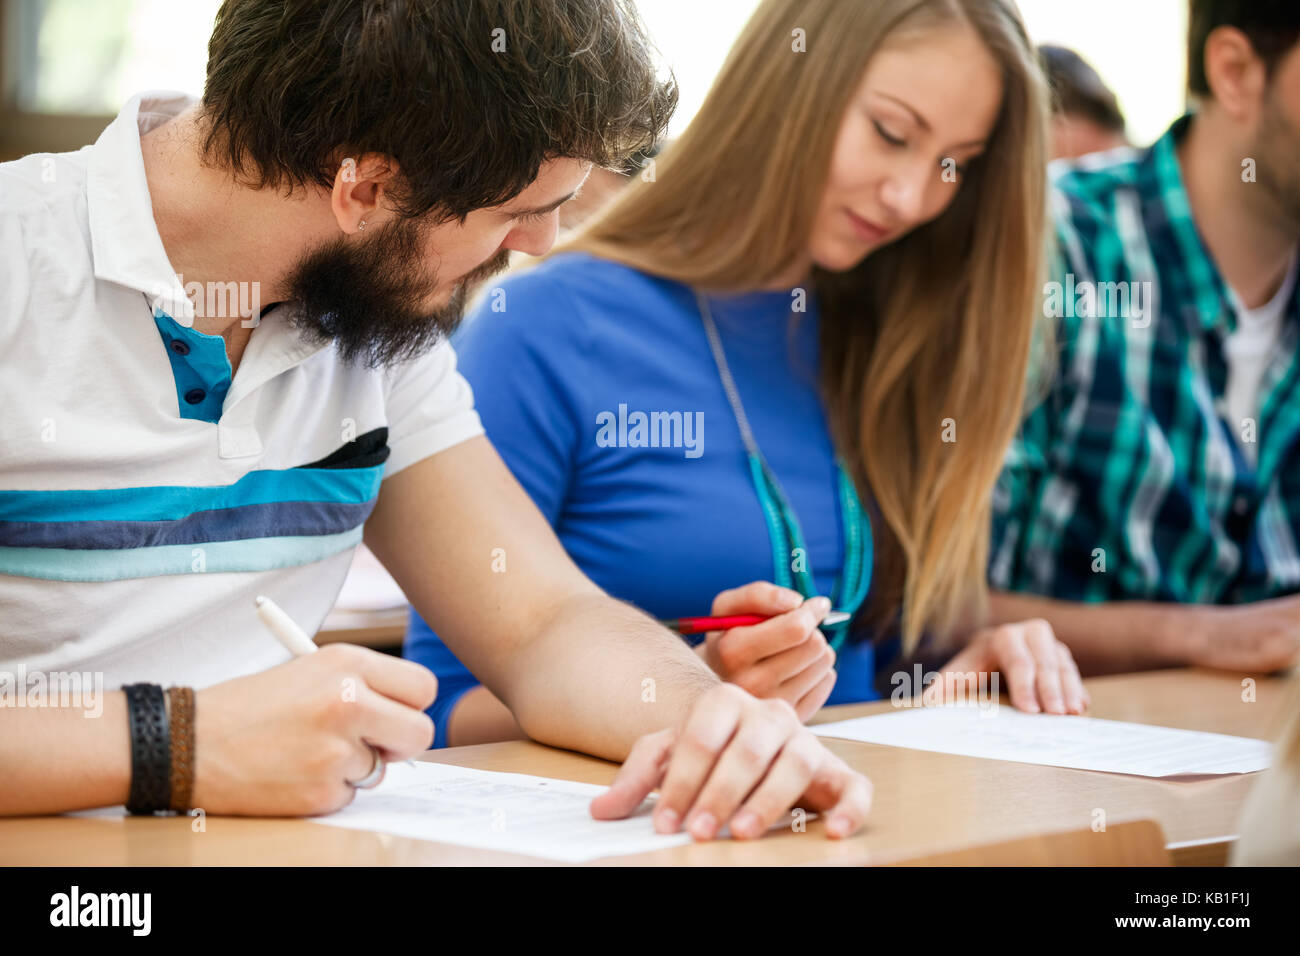 education student cheating on exams by looking at another student's test Stock Photo